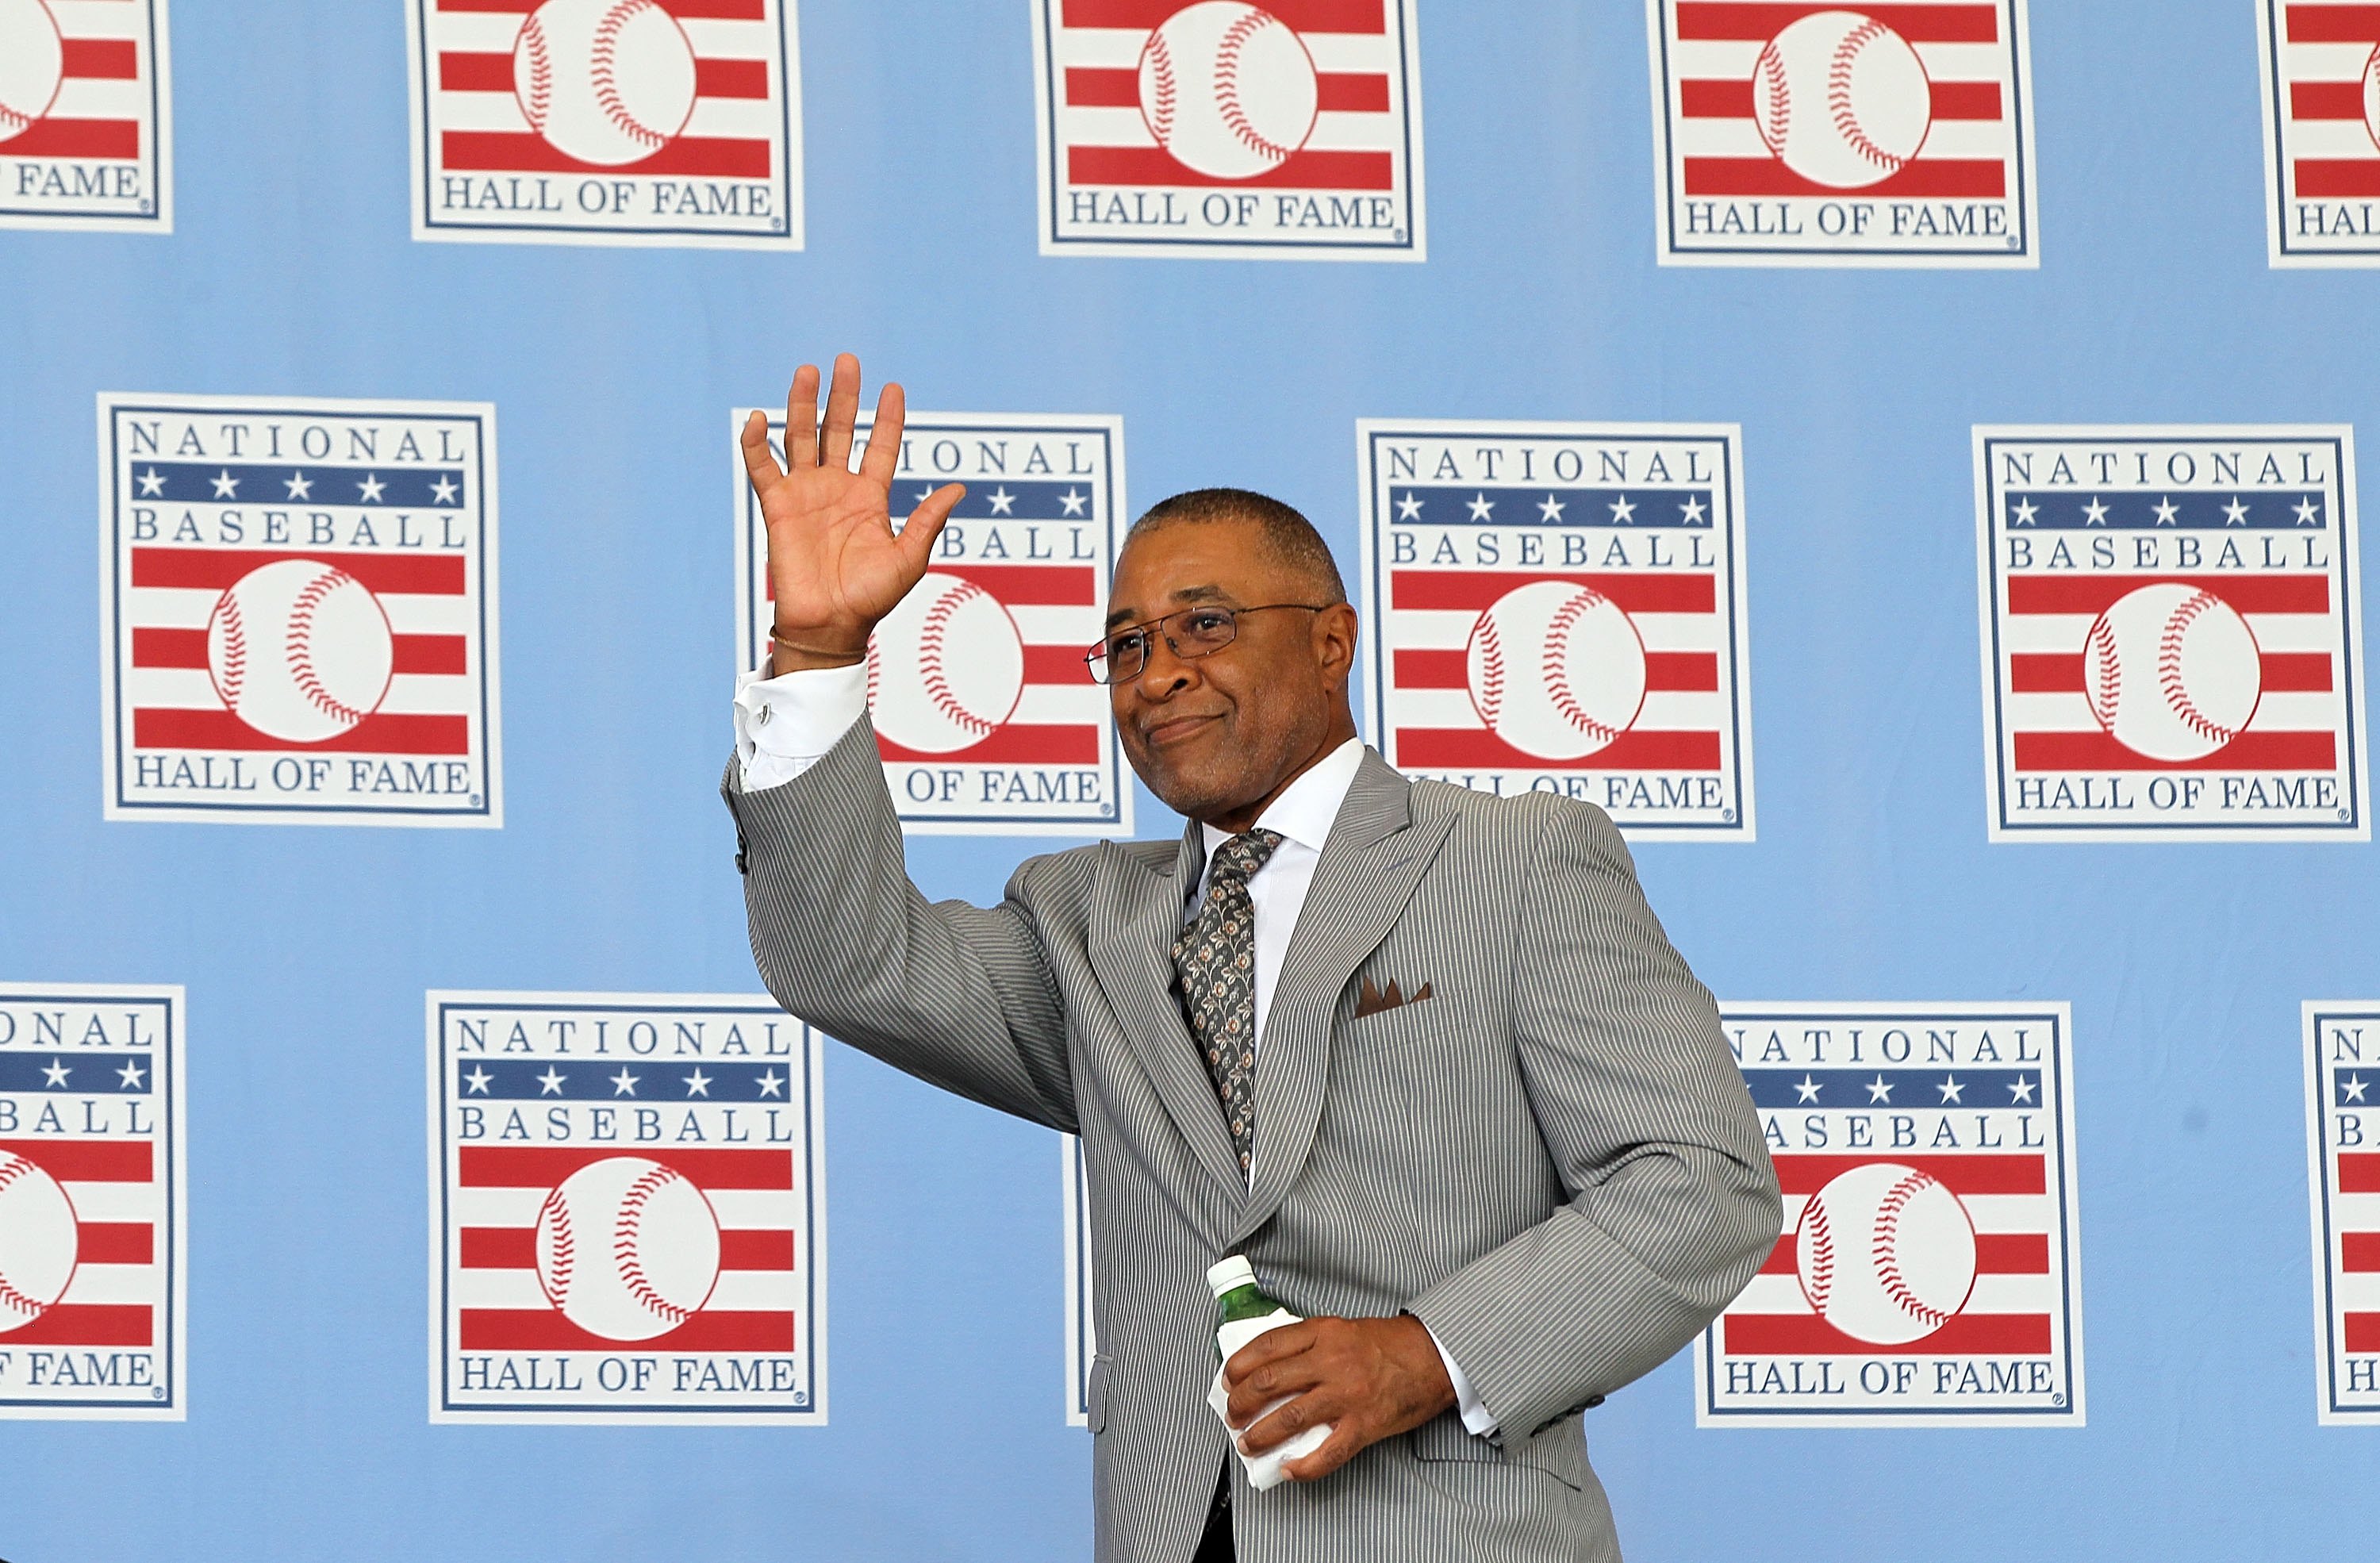 2011 Baseball Hall of Fame Induction Ceremony